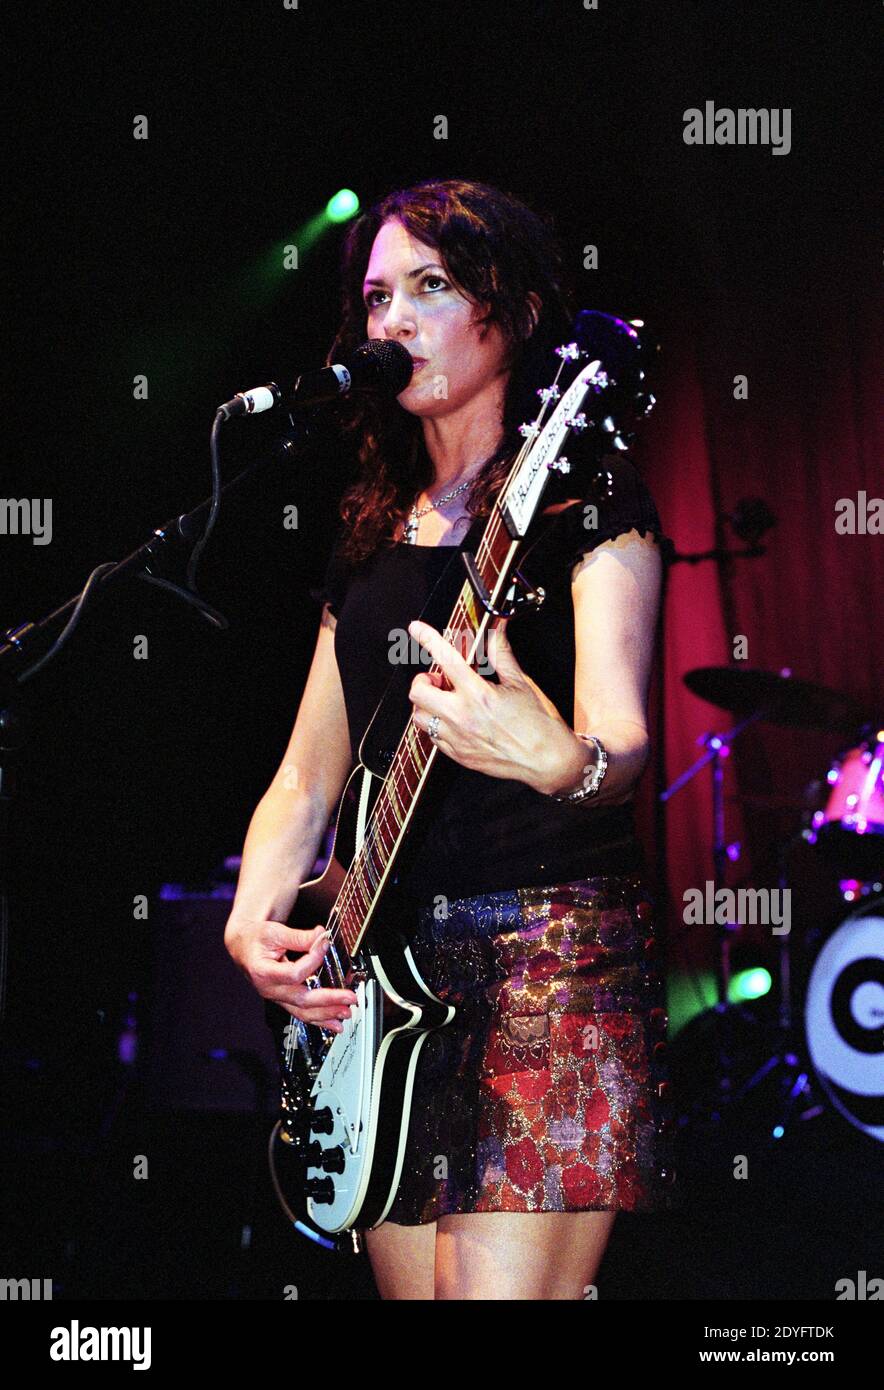 Susanna Hoffs on stage with The Bangles in concert at the Shepherds Bush Empire in London. 21 March 2003. Stock Photo